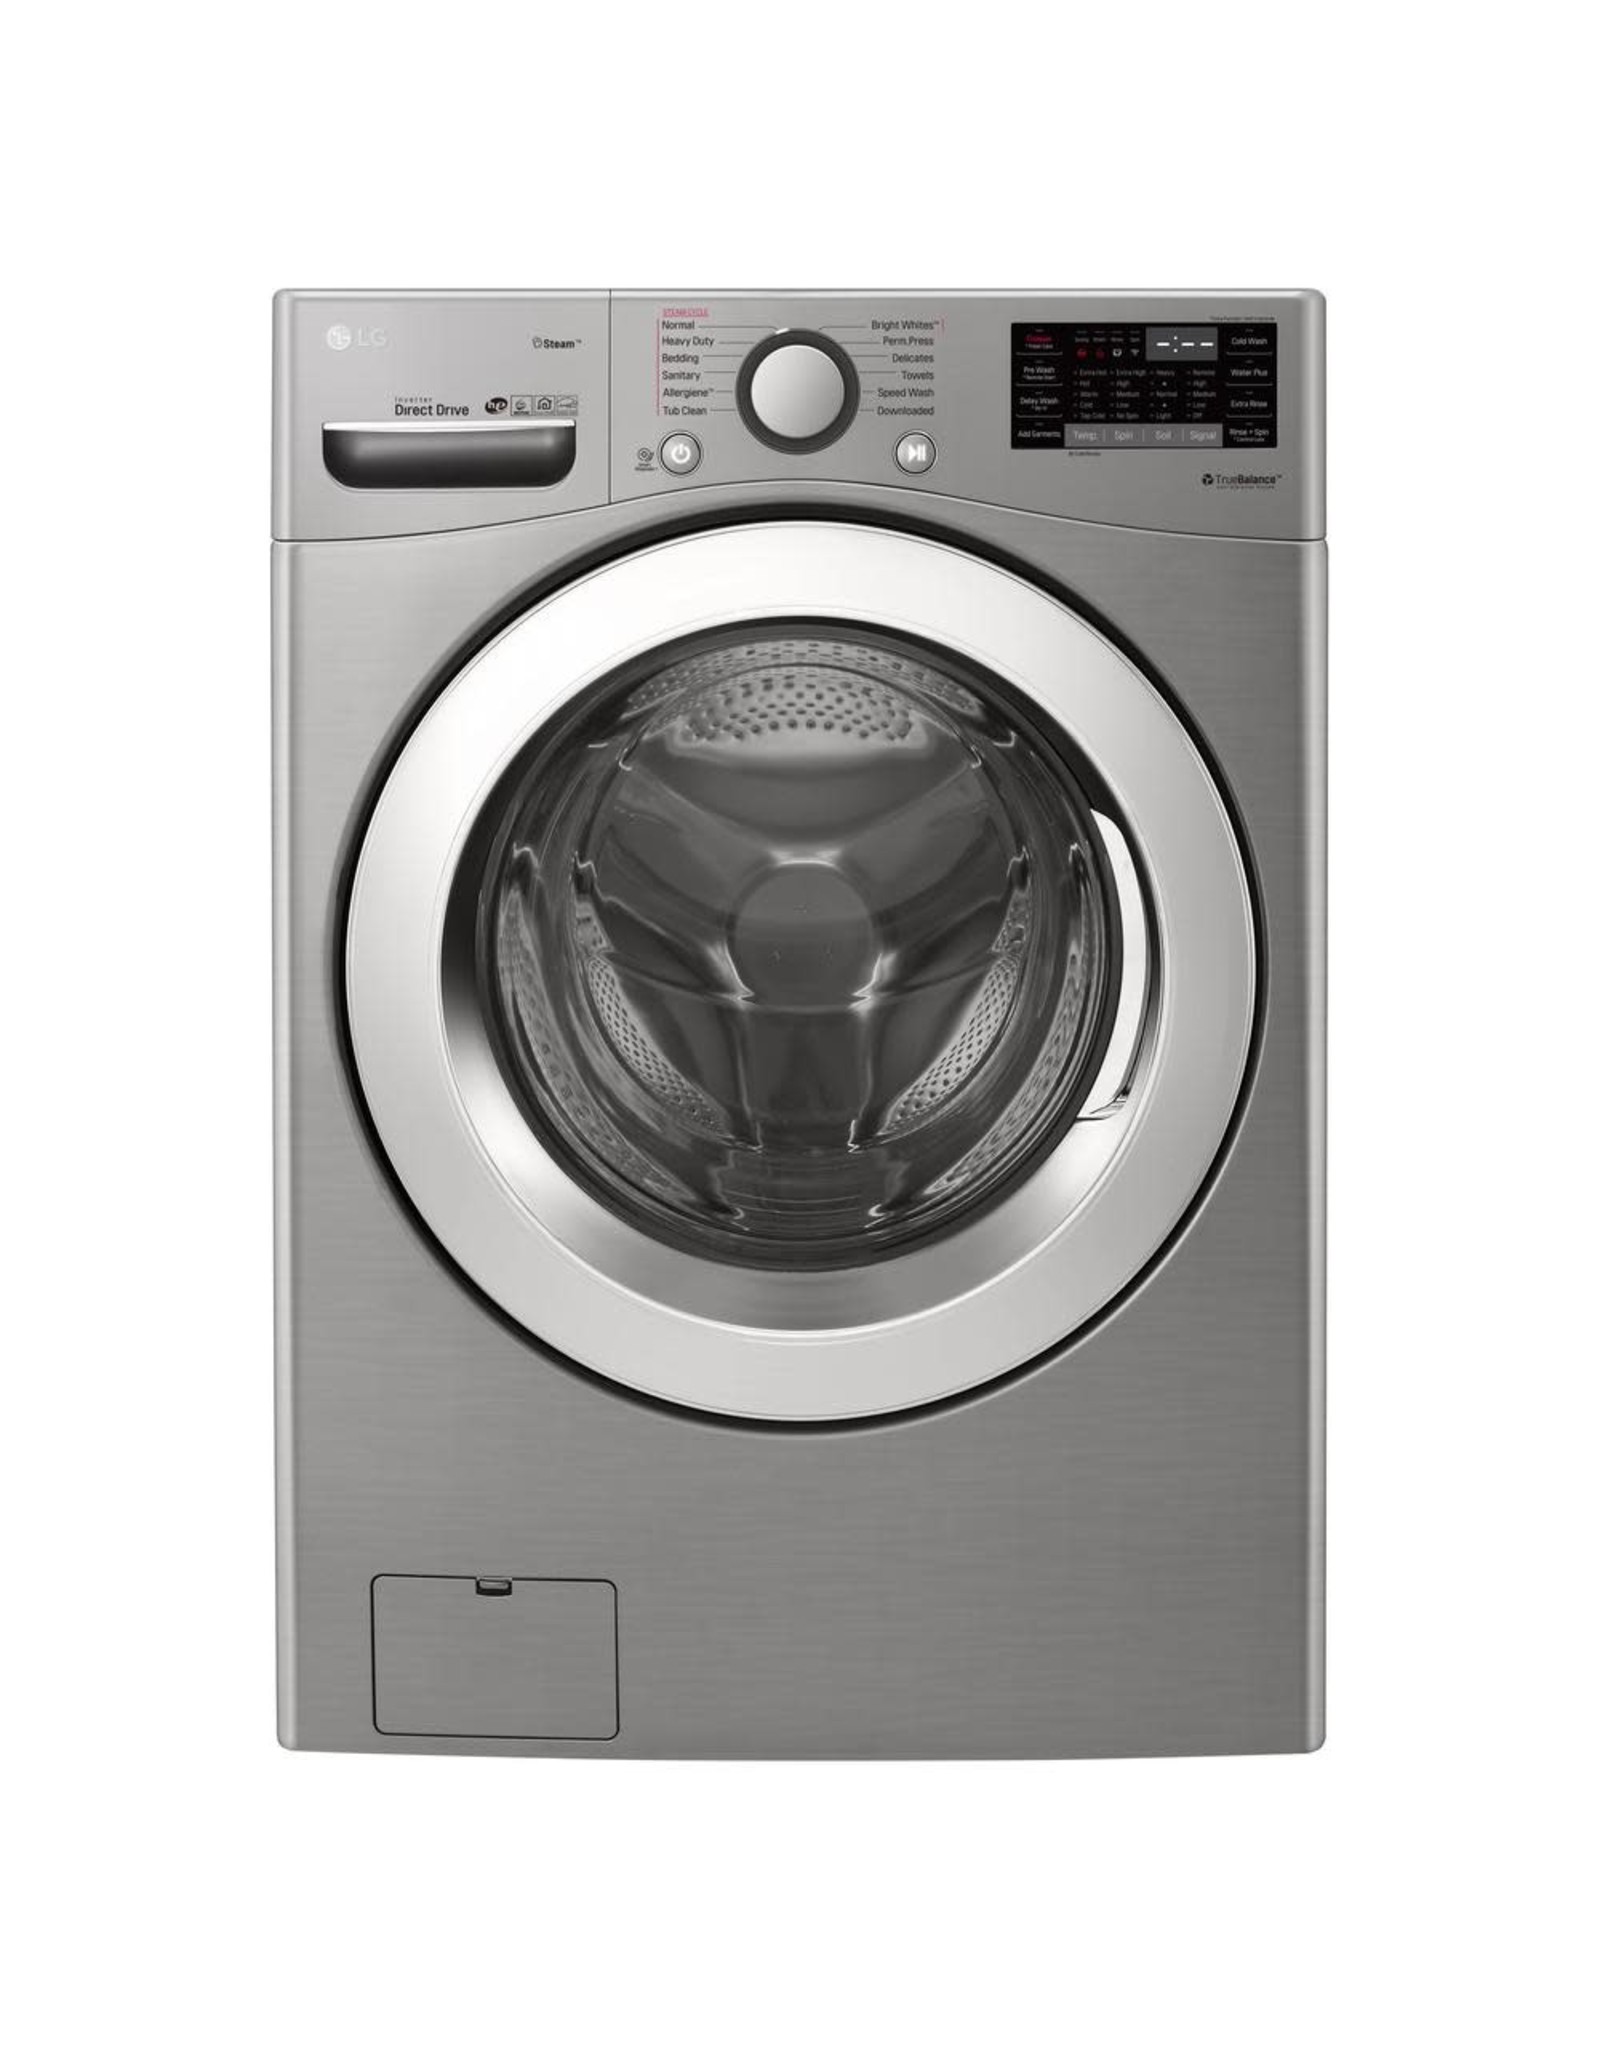 LG Electronics WM3700HVA 4.5 cu.ft. High Efficiency Large Smart Front Load Washer with Steam and Wi-Fi Enabled in Graphite Steel, ENERGY STAR